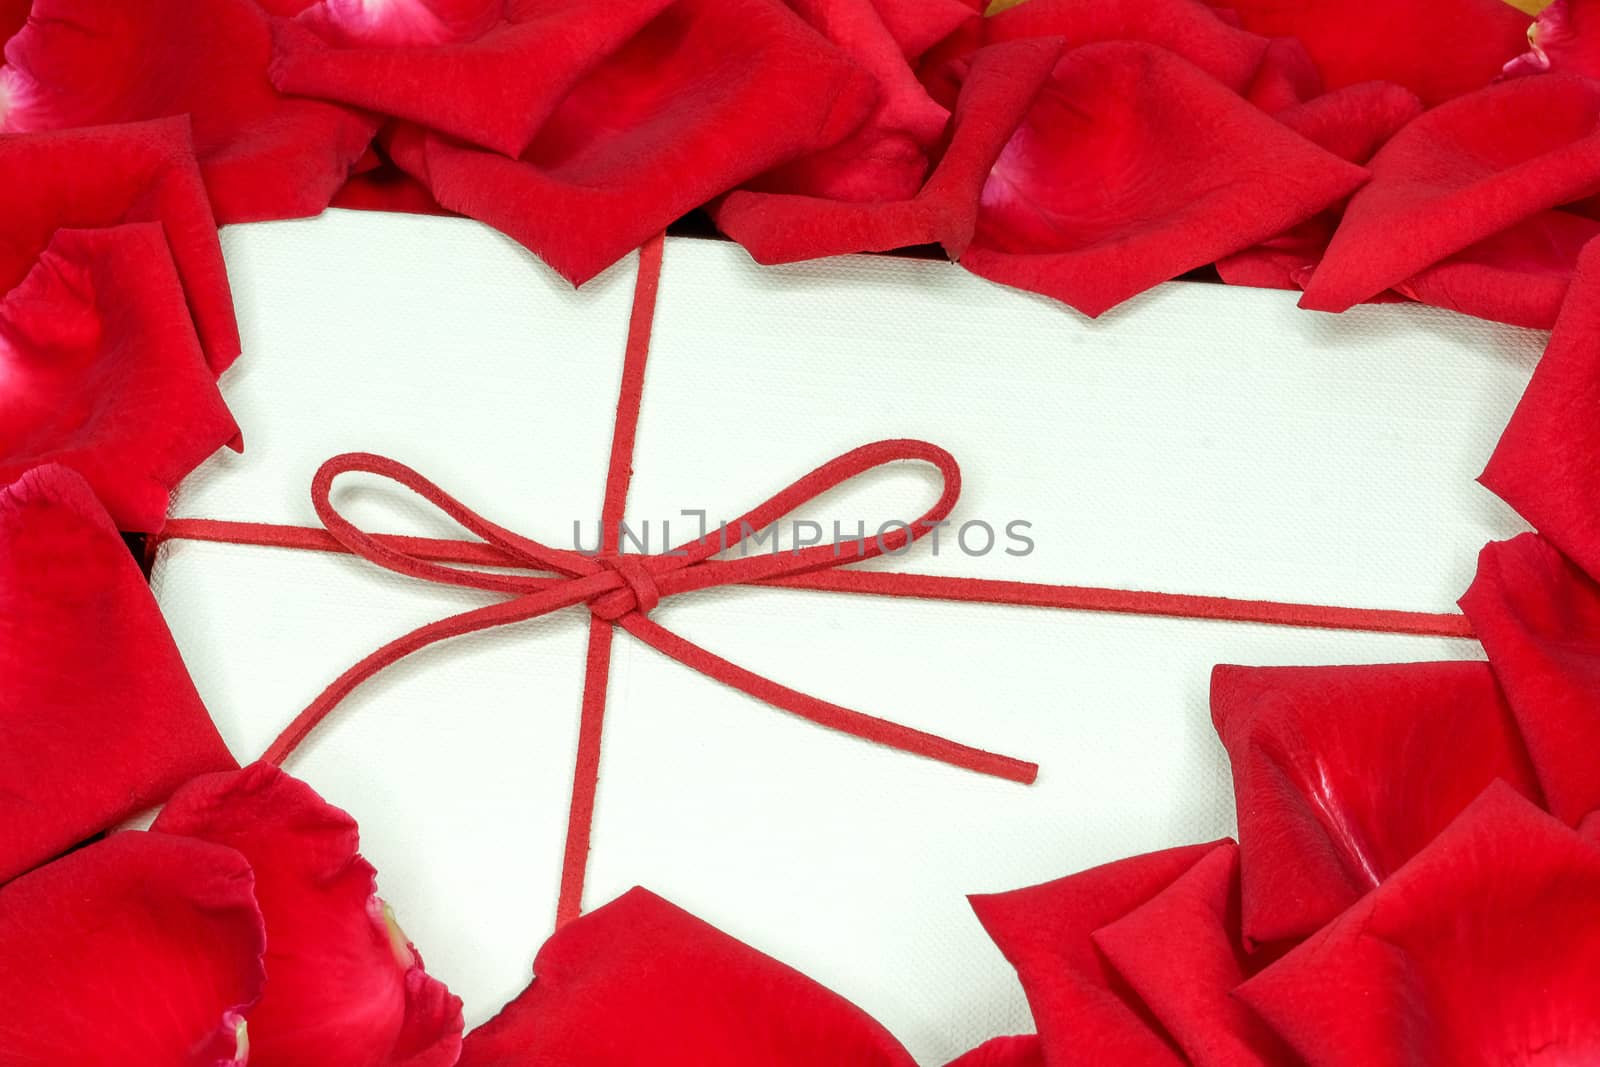 a white box surrounded by red rose petals